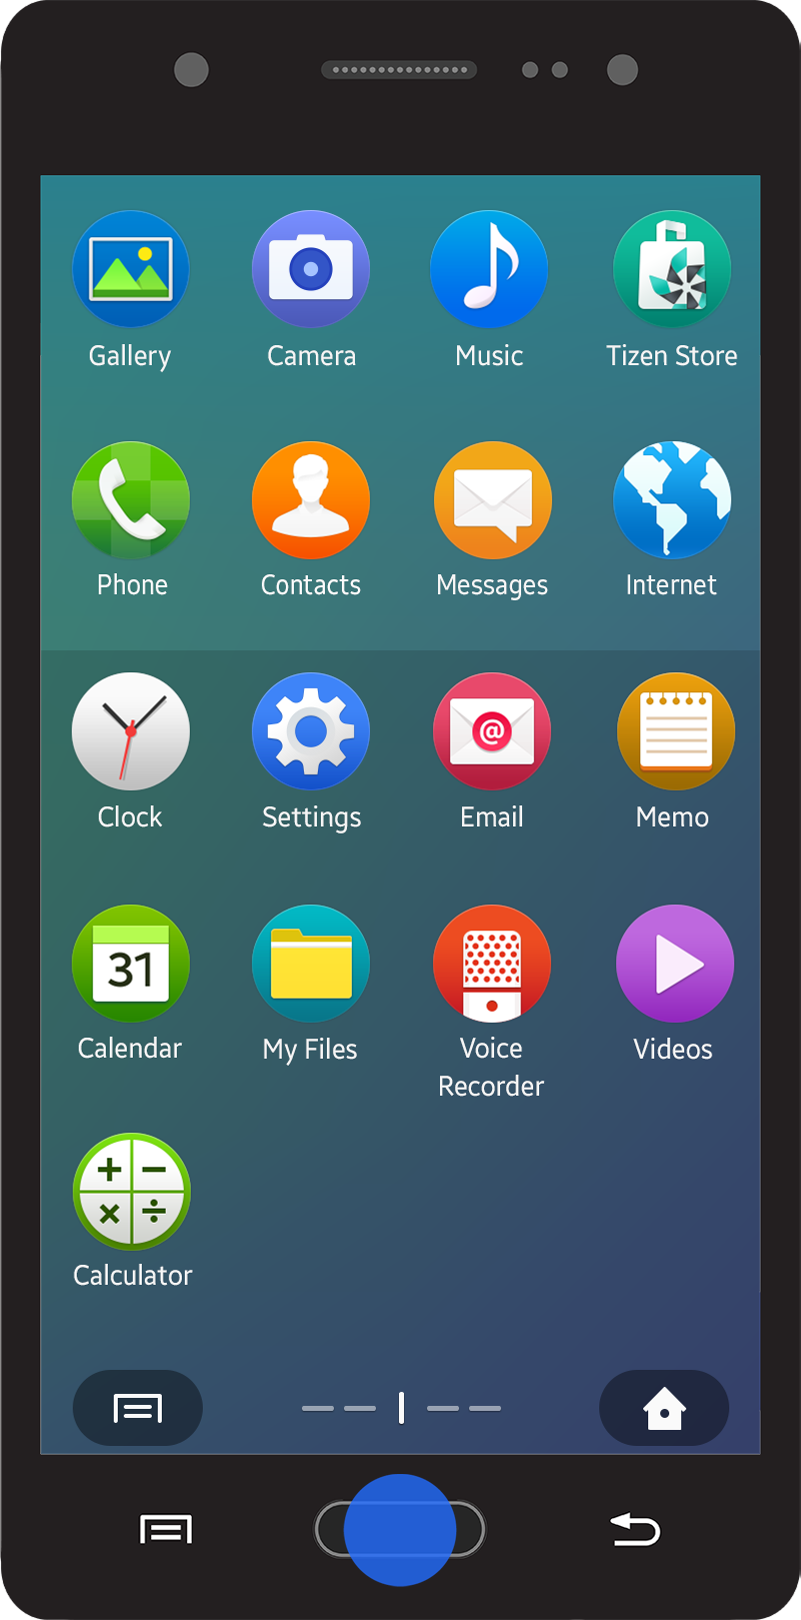 Navigation to the Home screen